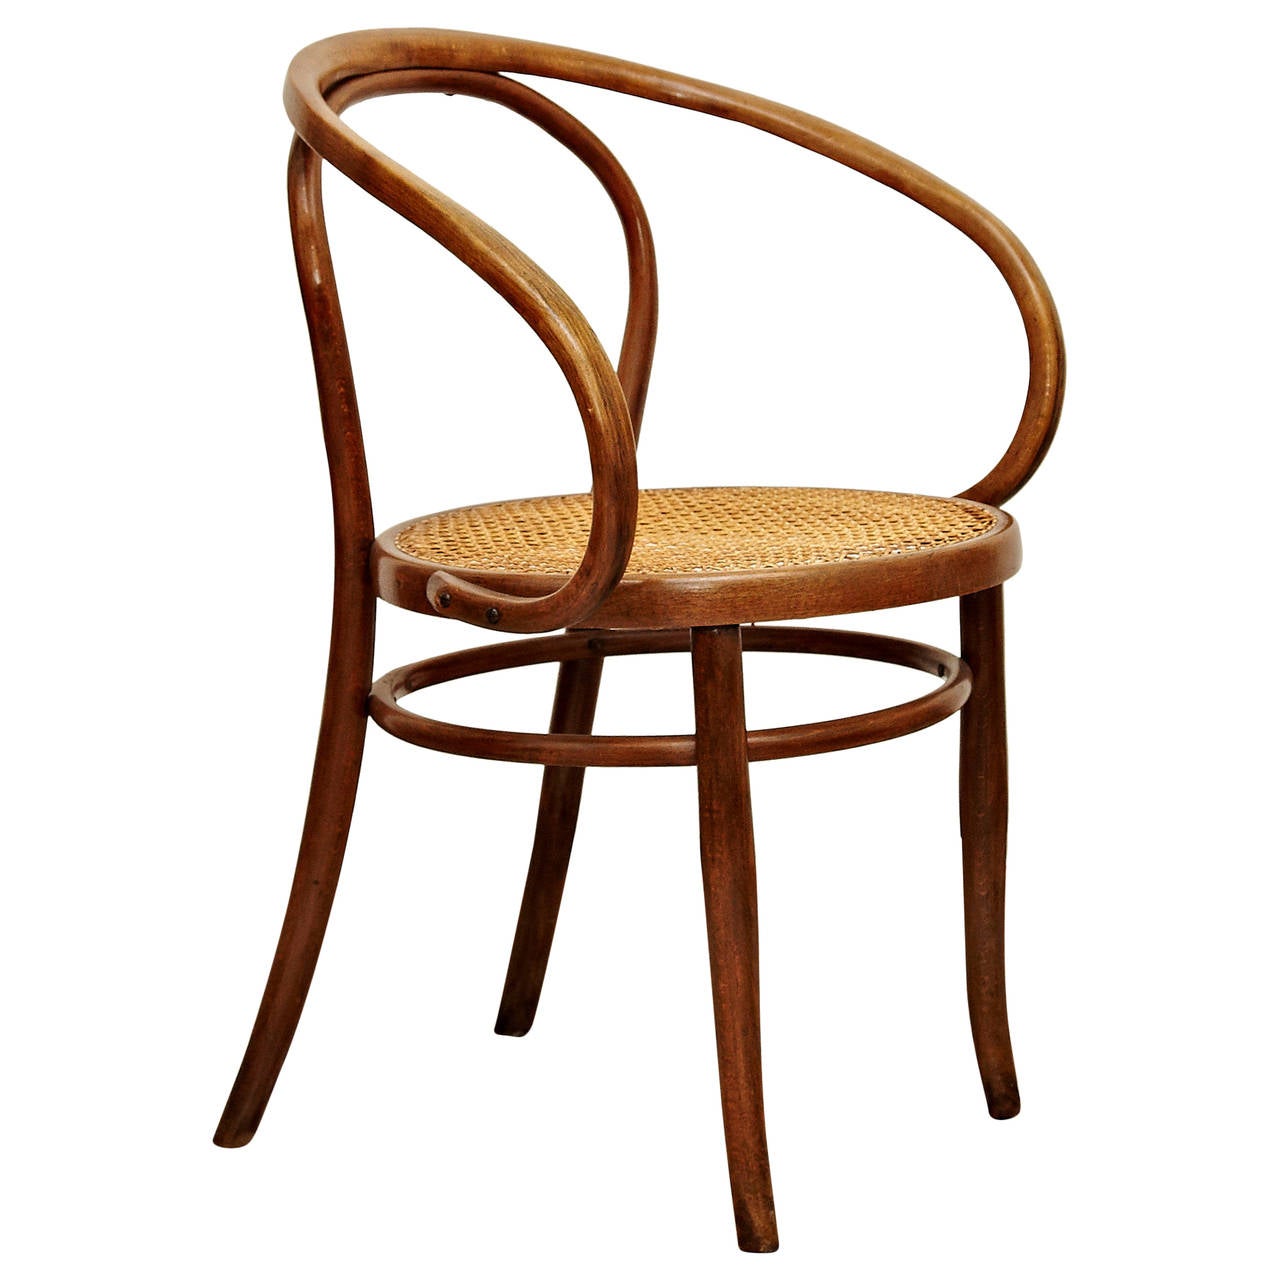 Thonet 209 Armchair by Auguste Thonet for Thonet, circa 1900 at 1stDibs |  thonet armchair